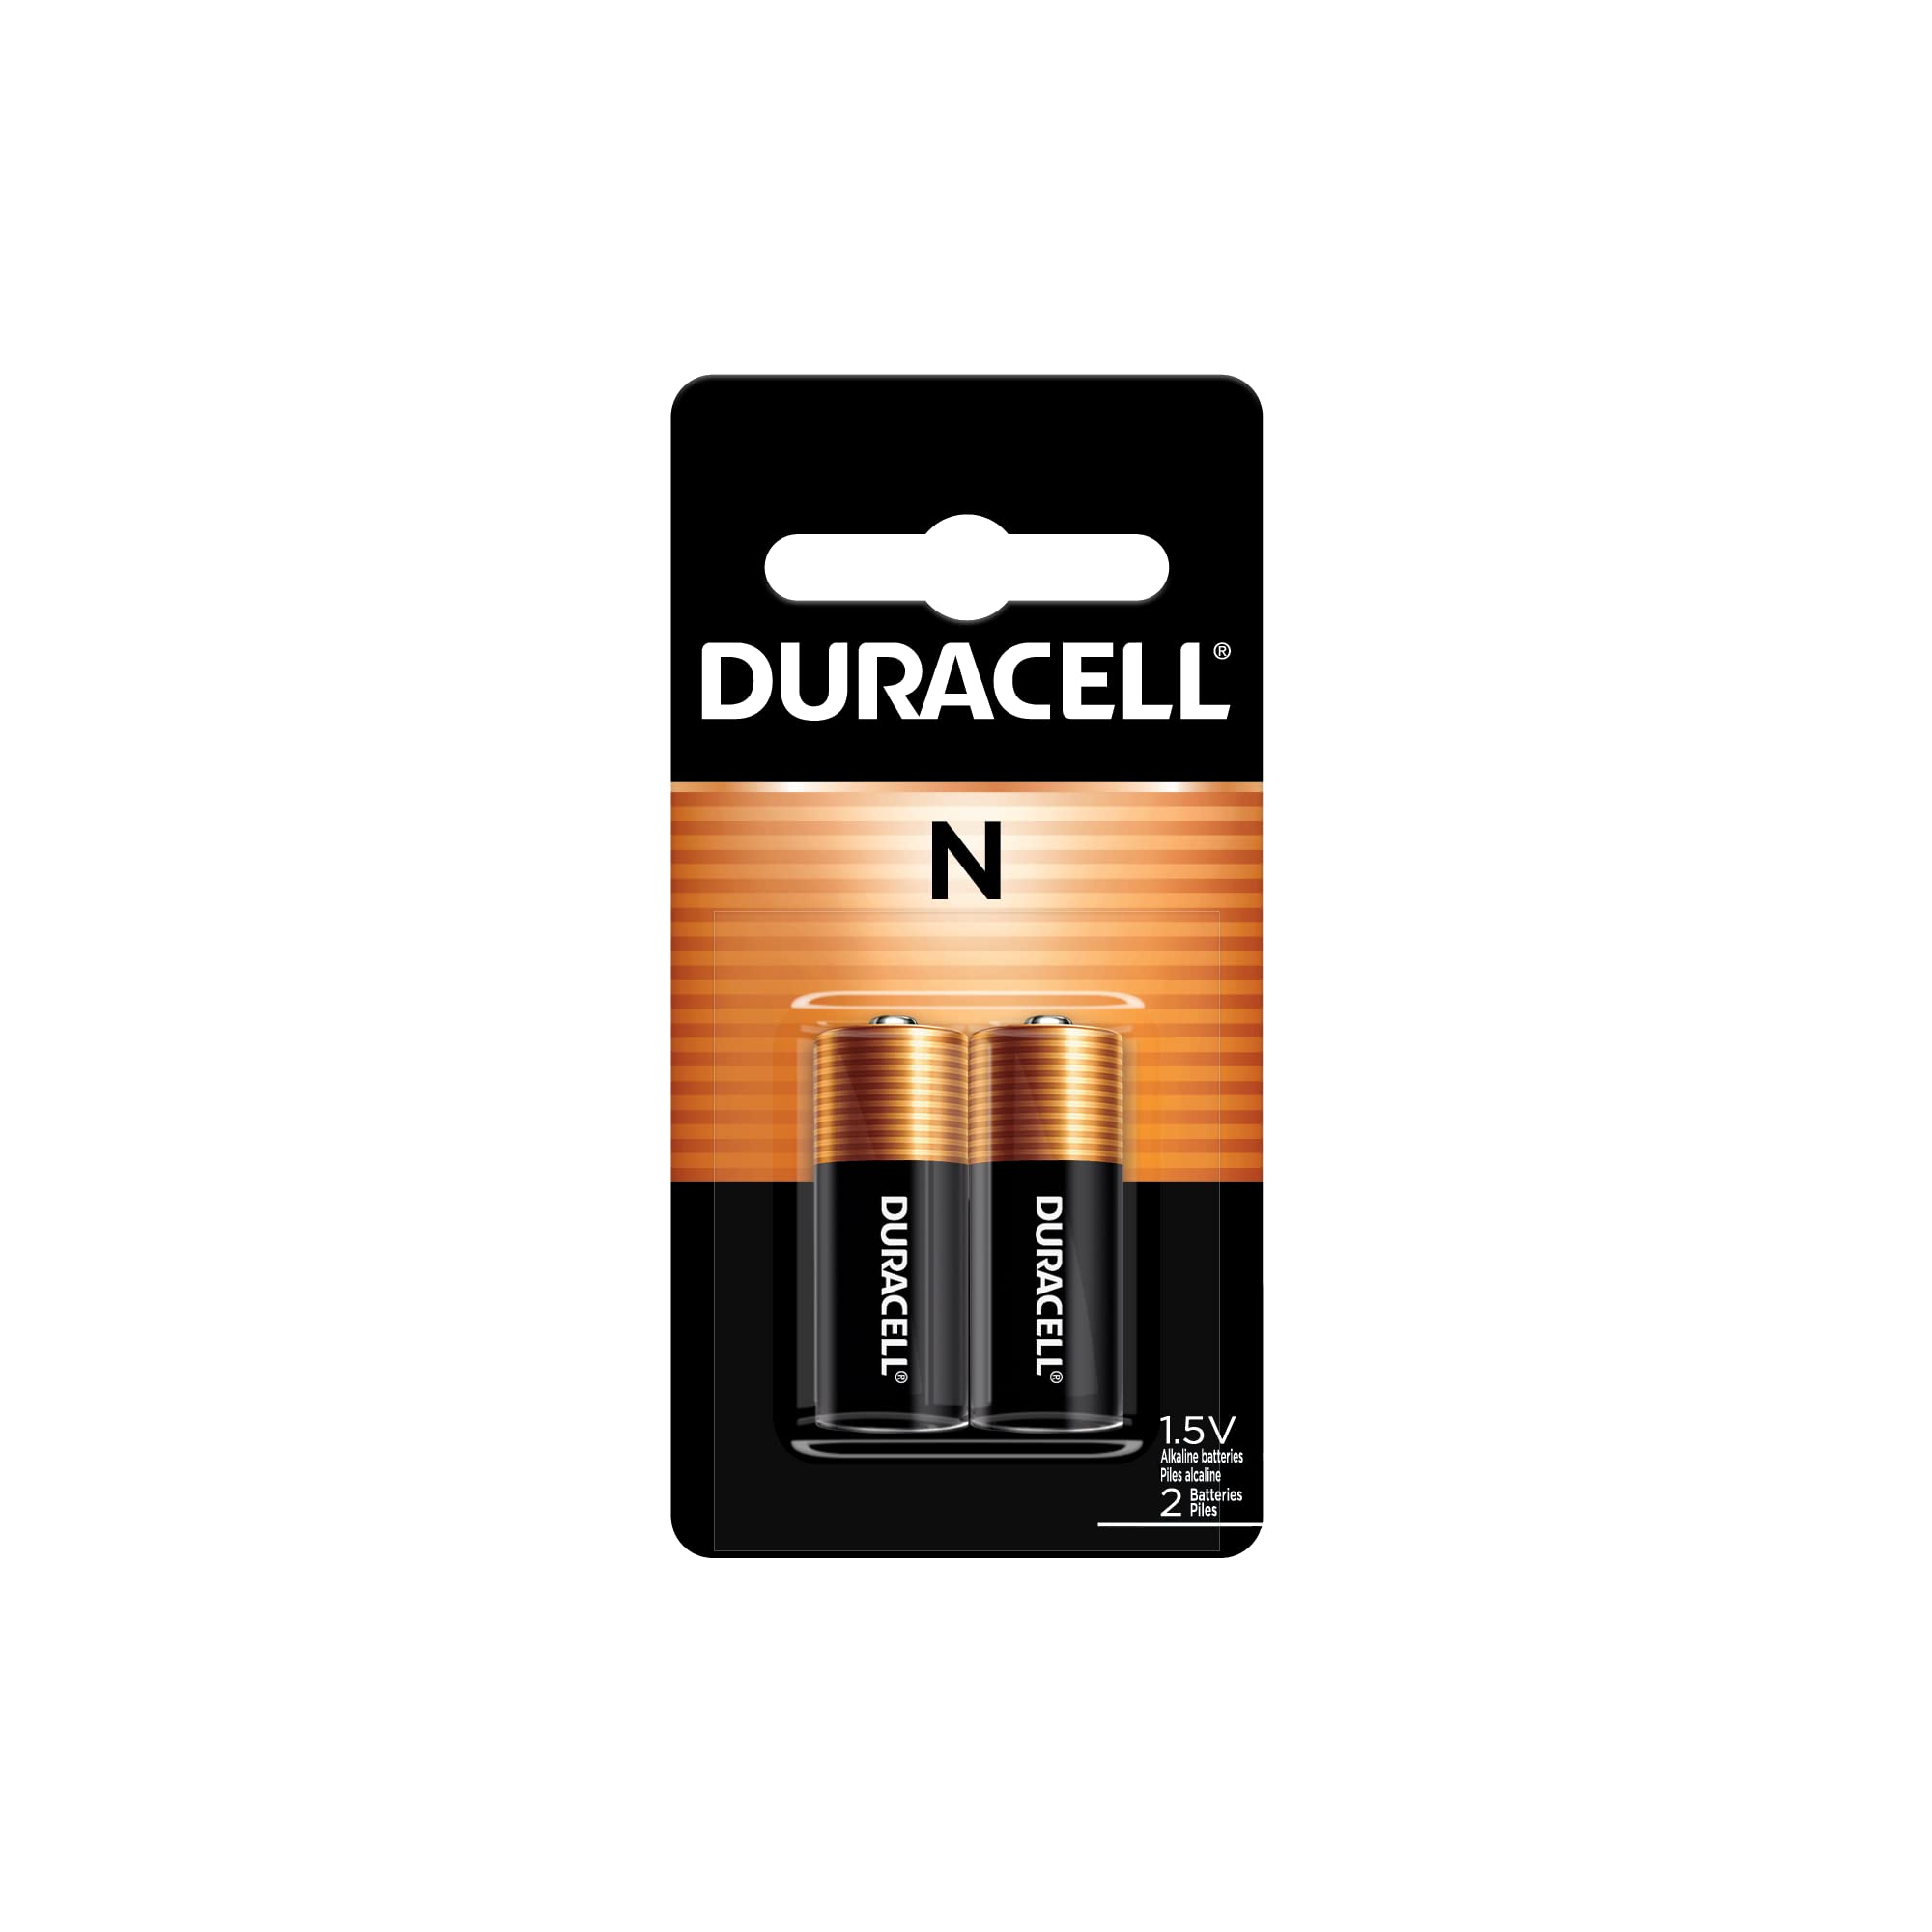 $3.03 /w S&S: Duracell N 1.5V Alkaline Battery, 2 Count